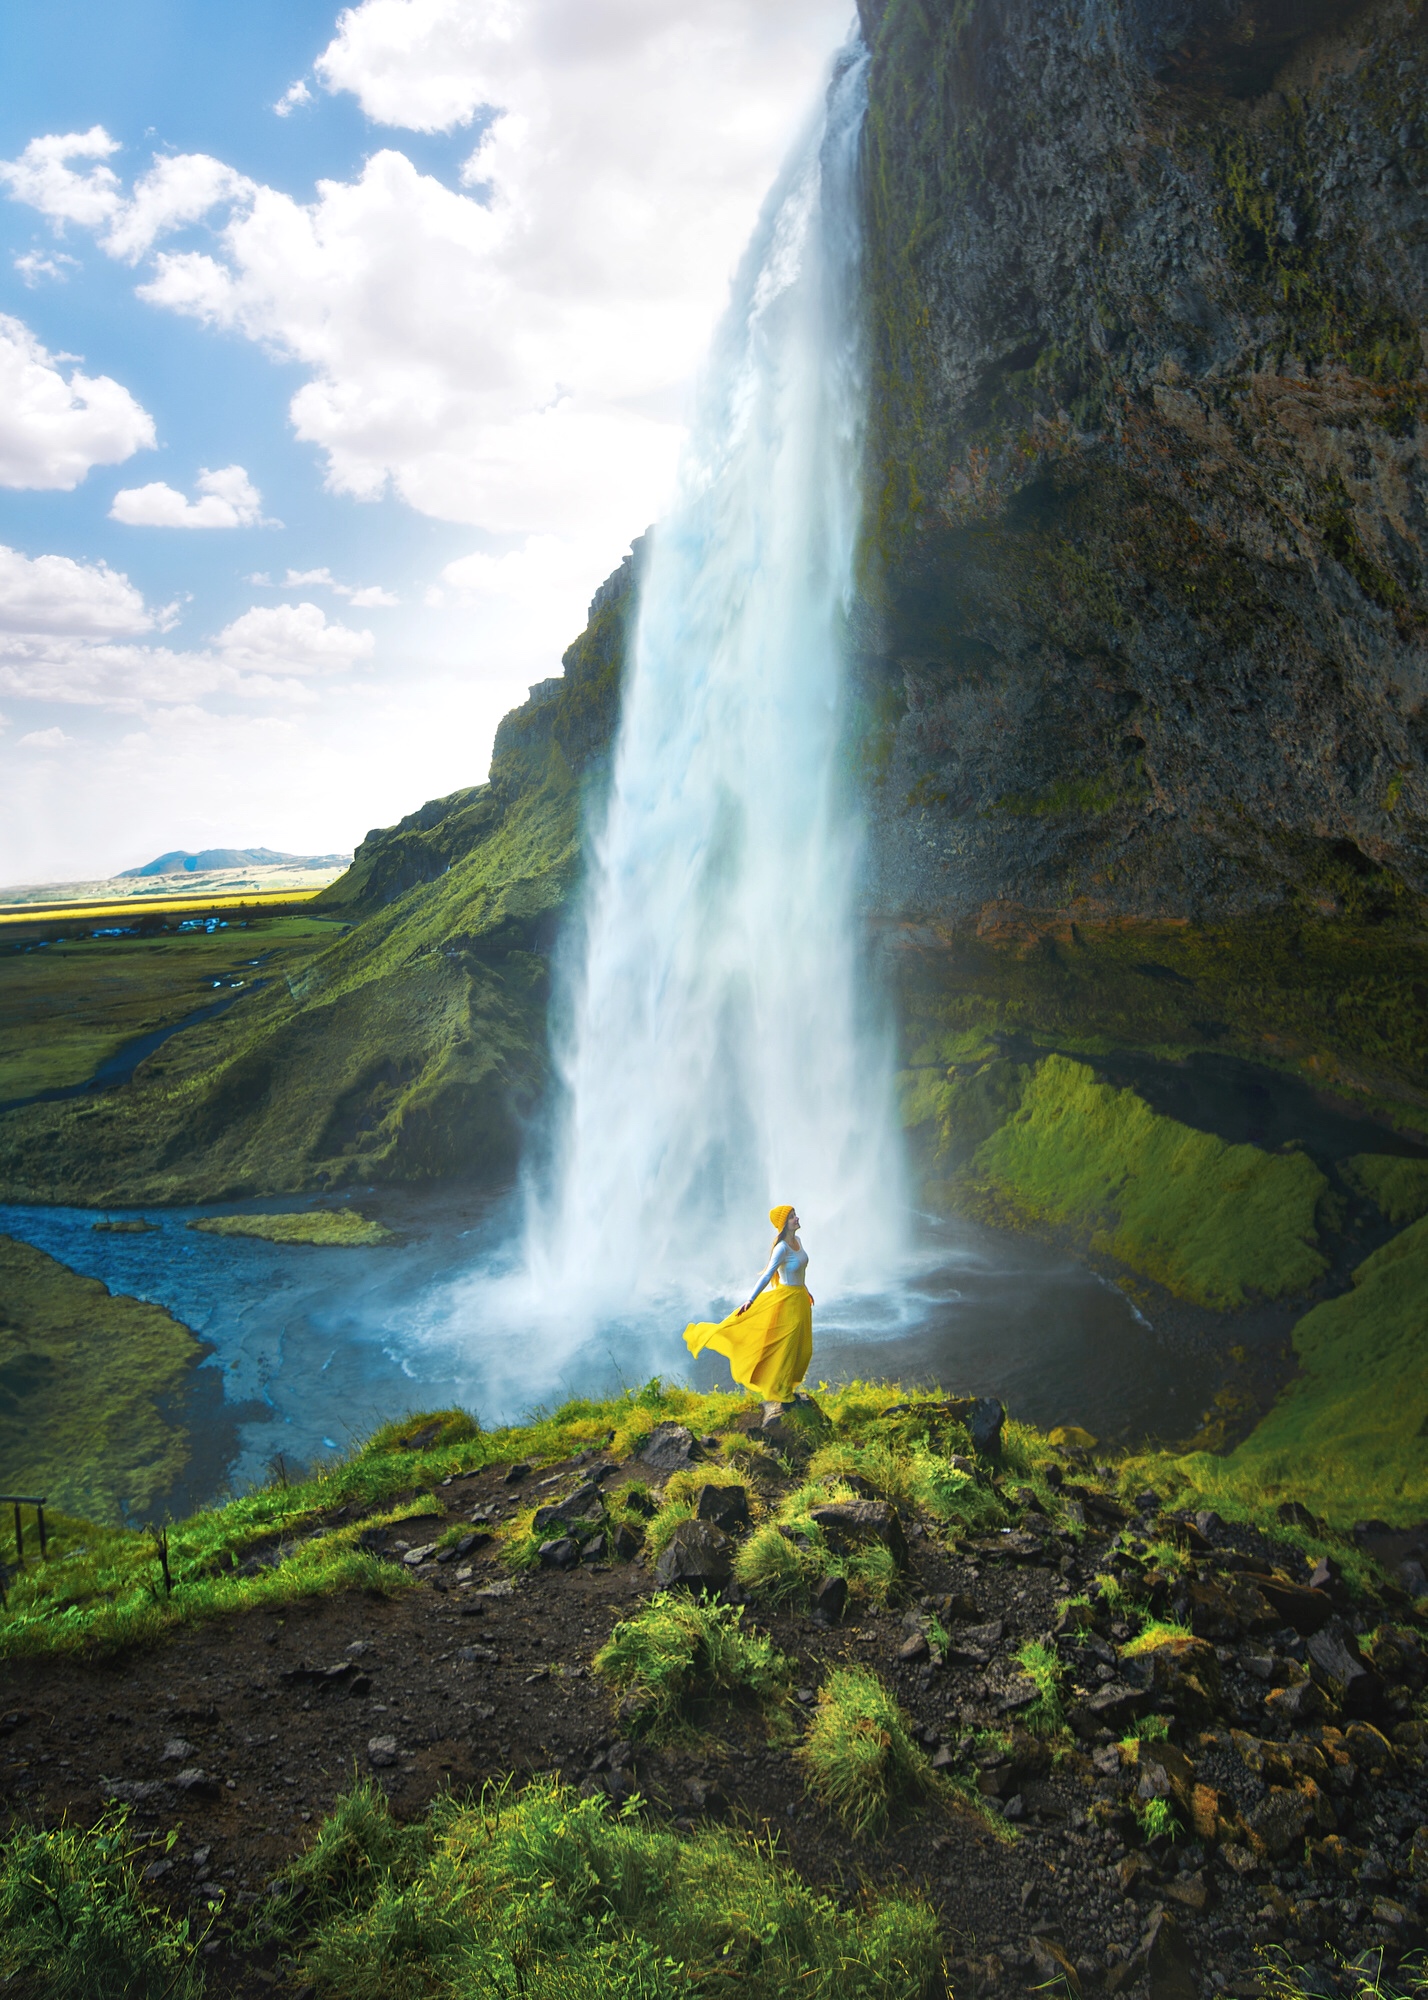 Woman in a flowing yellow skirt in front of the tall Seljalandsfoss waterfall gushing over a cliff.